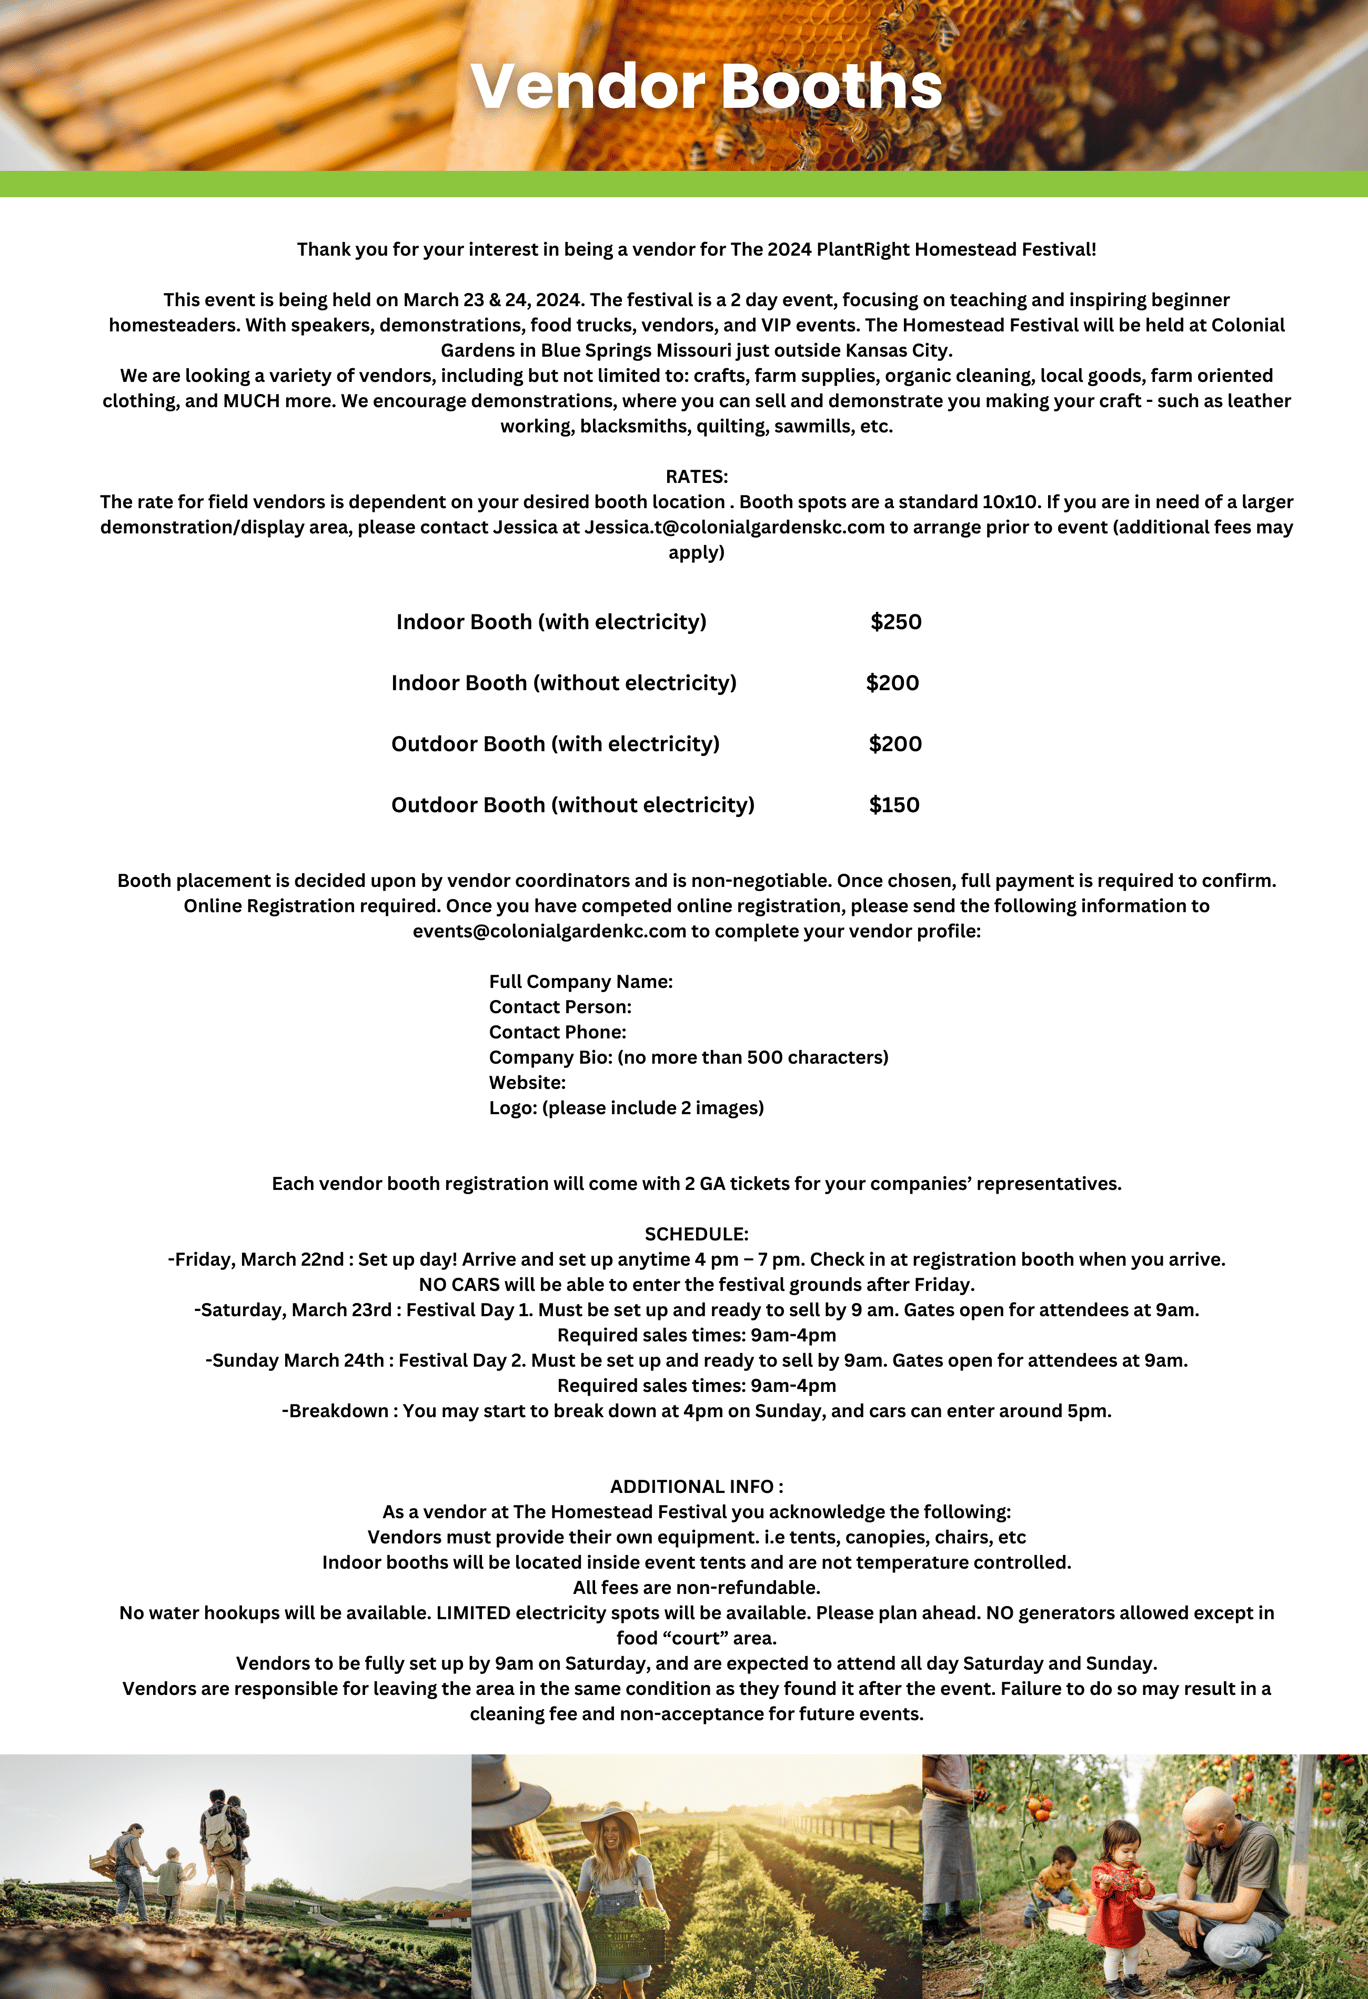 Image P4 Homestead Sponsorship Opportunities (2600 x 3800 px) (6)